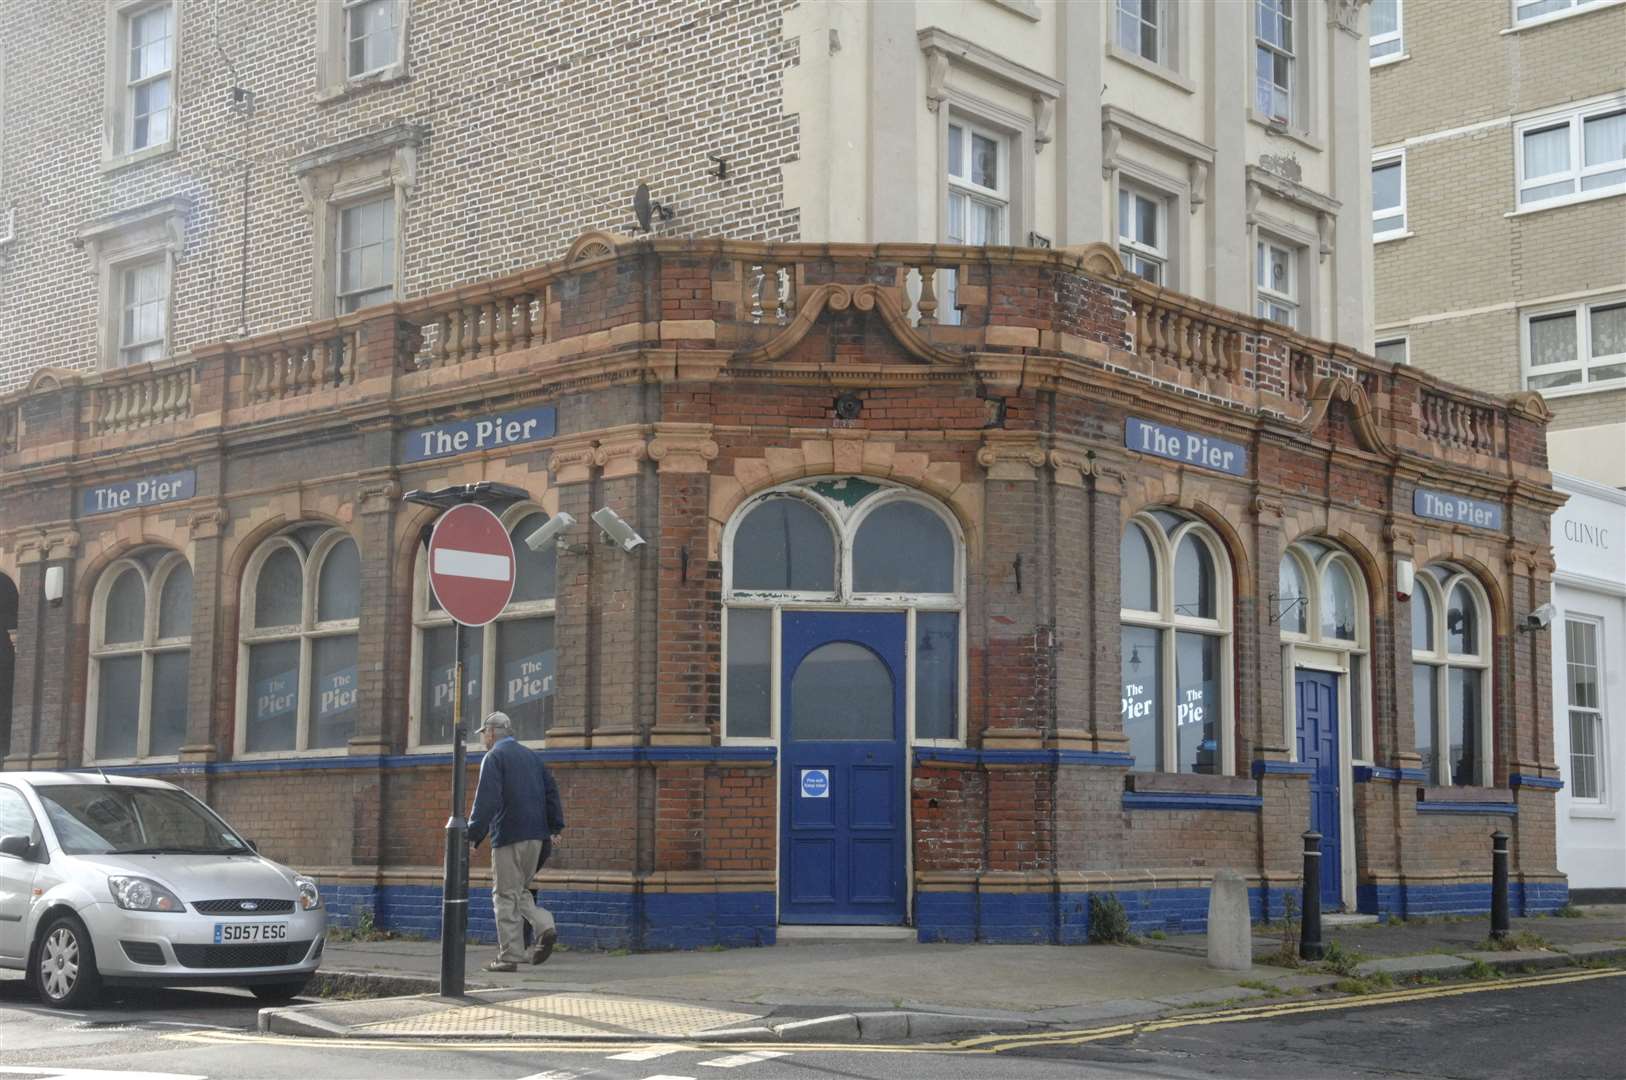 The Pier Hotel in Station Road, Herne Bay, is set to reopen as a Sri Lankan-inspired restaurant and cocktail bar. Picture: Chris Davey